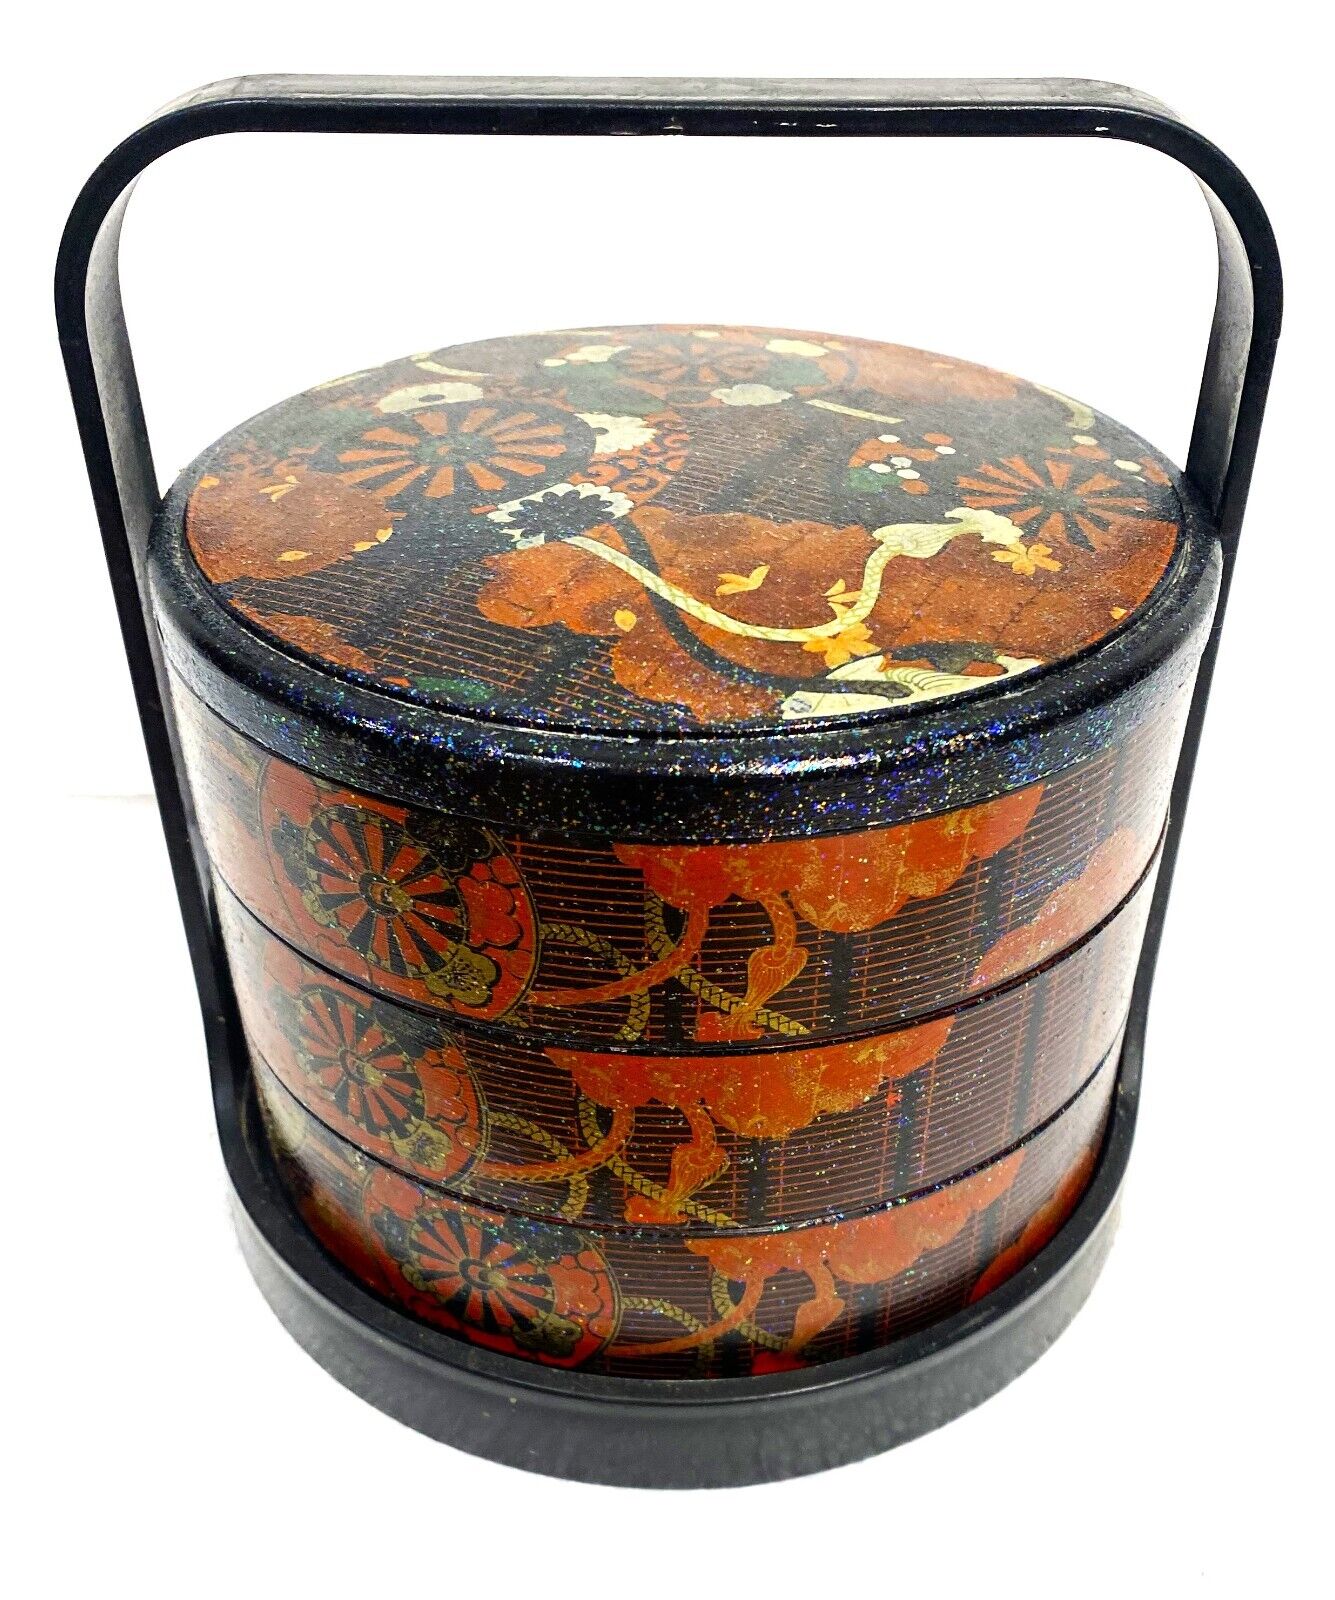 Vintage Japanese Lacquer Bento Lunch Storage 3 Tier Stackable Box - 8.3